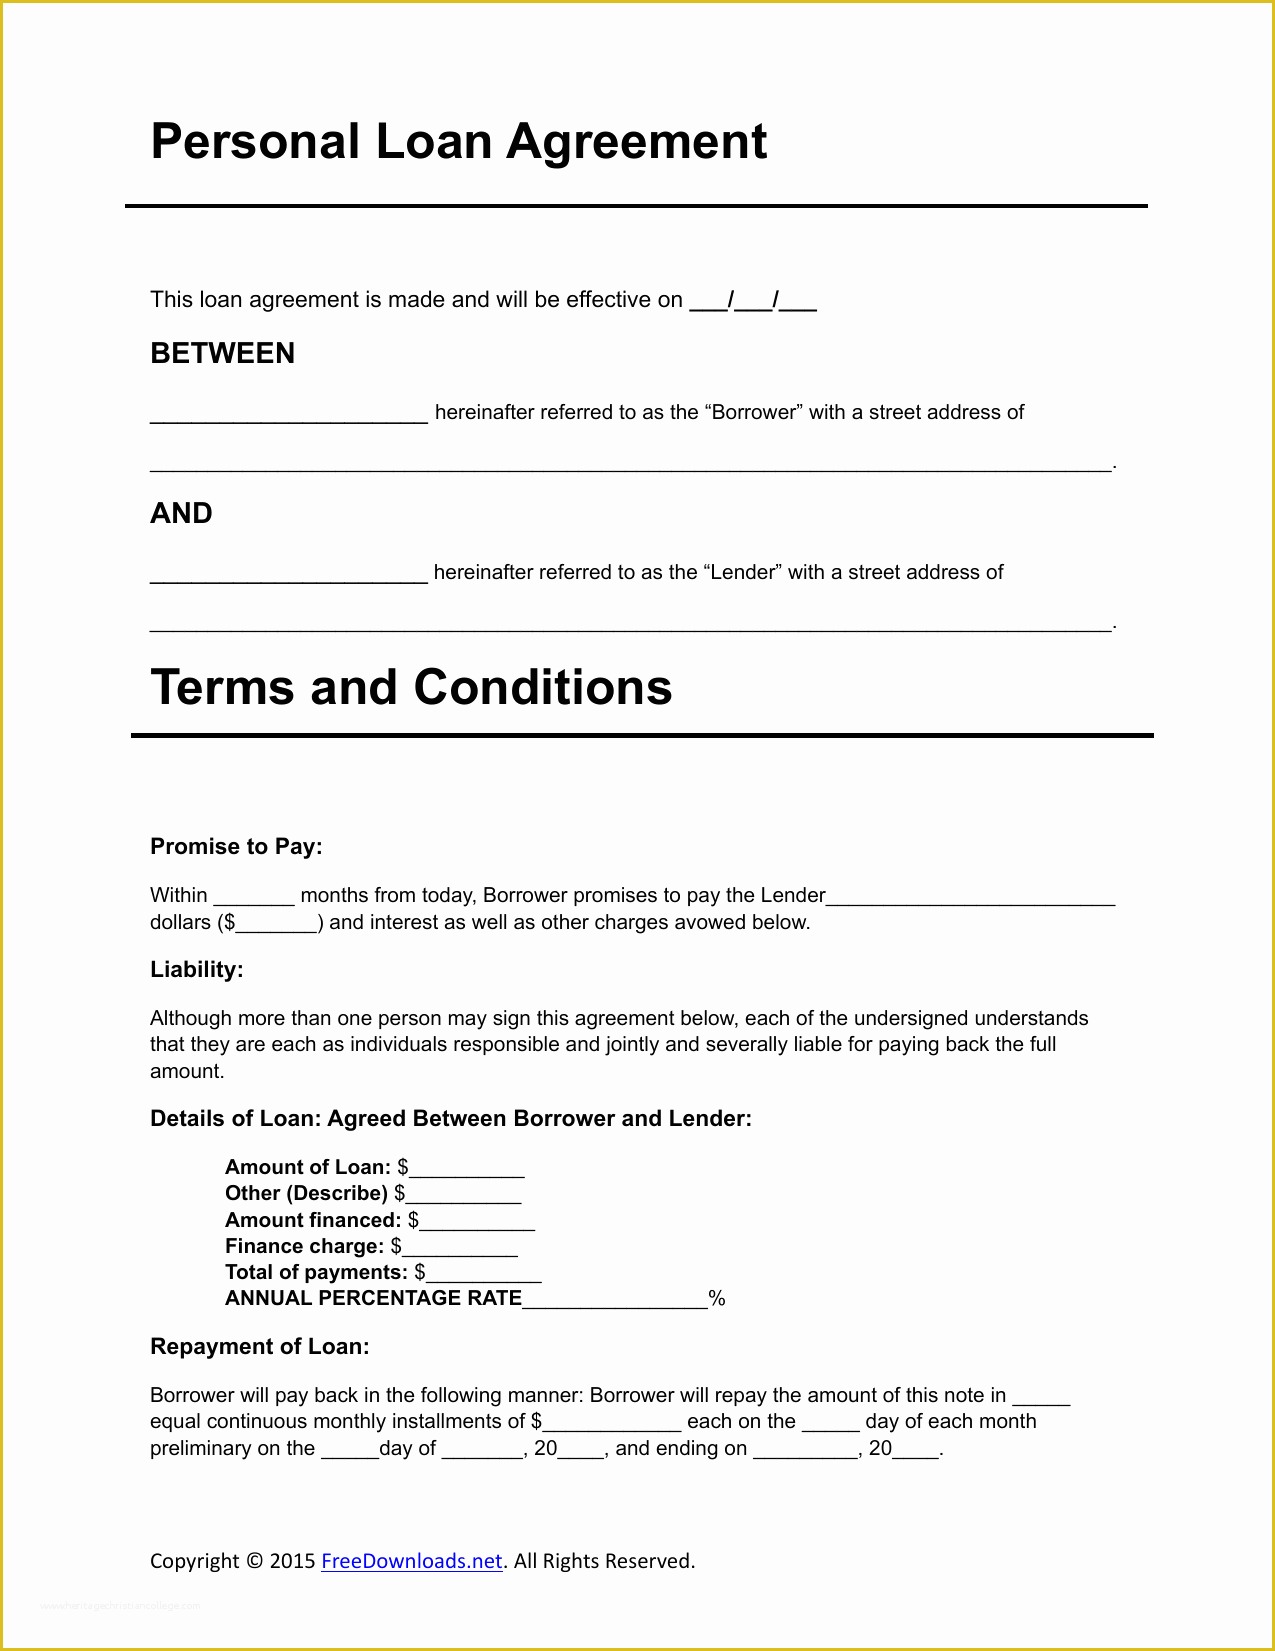 Free Loan Agreement Template Pdf Of Download Personal Loan Agreement Template Pdf